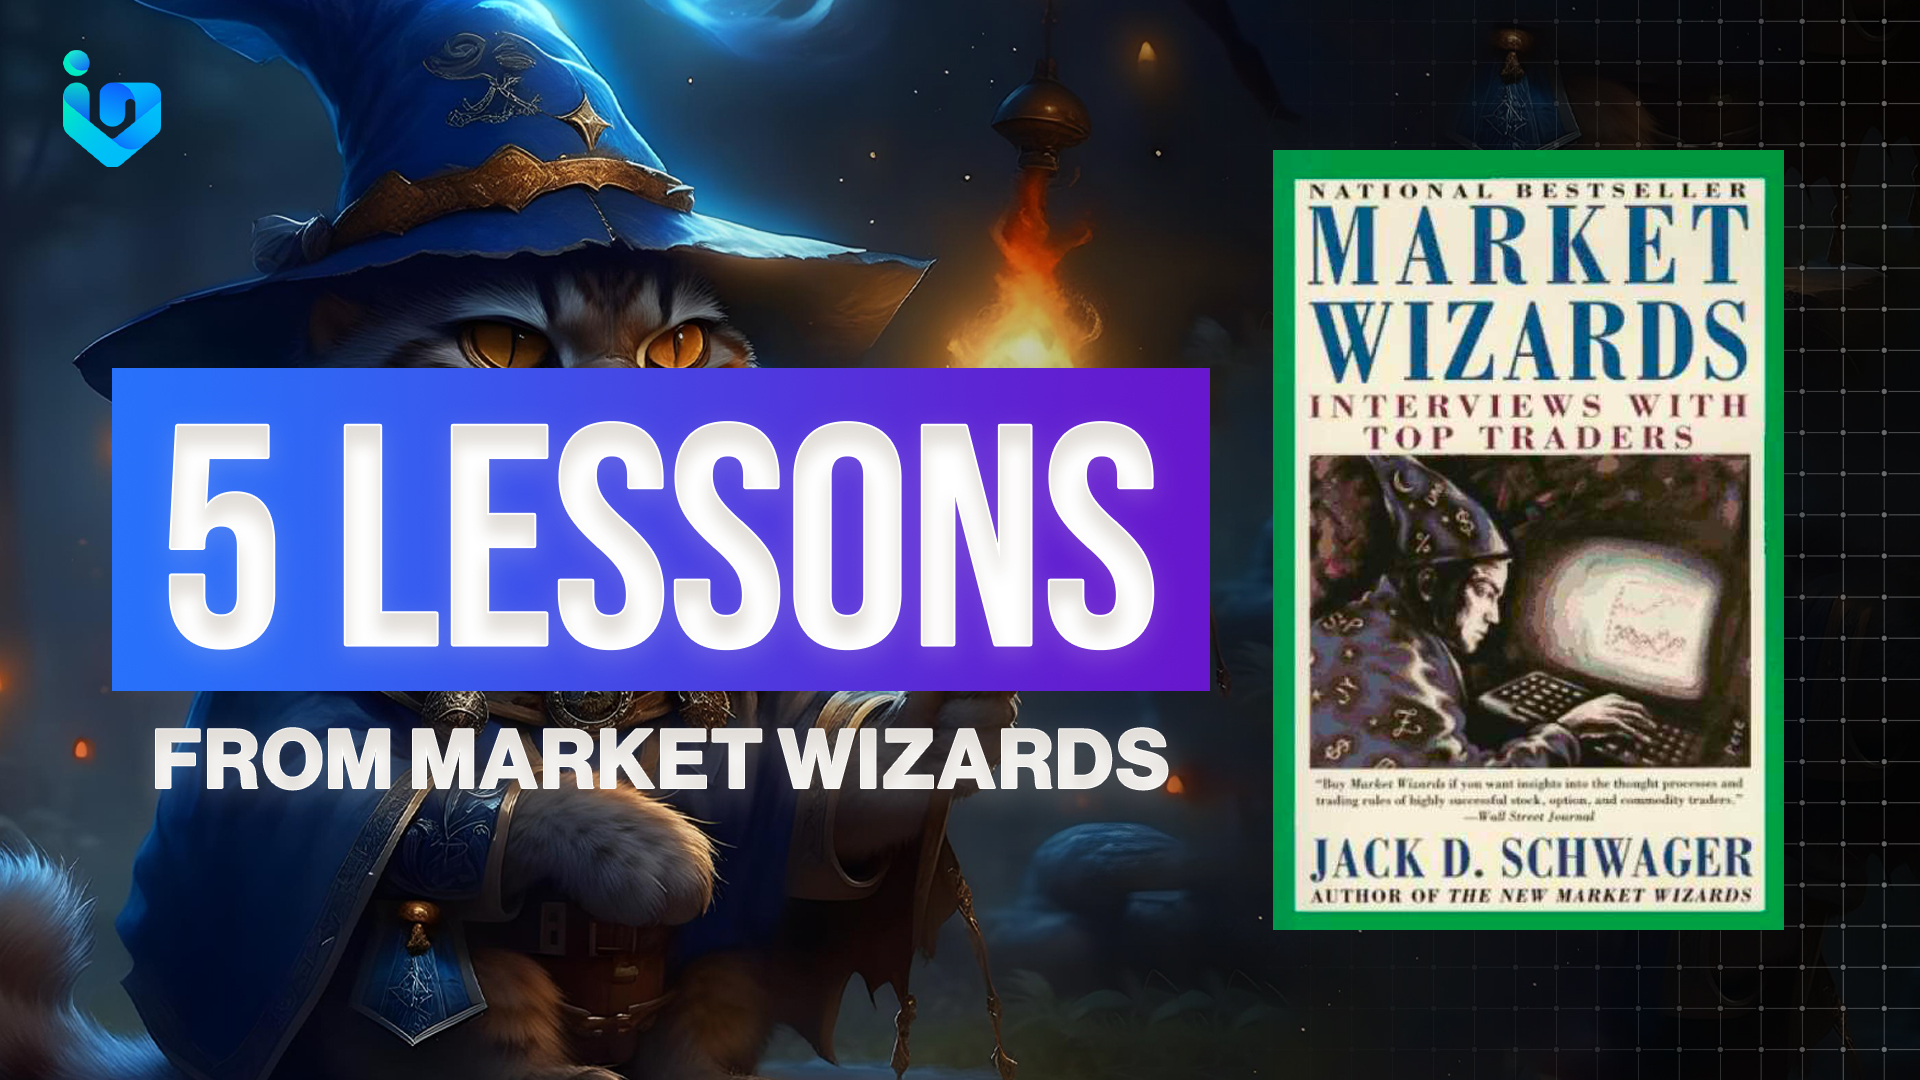 5 Lessons from Market Wizards